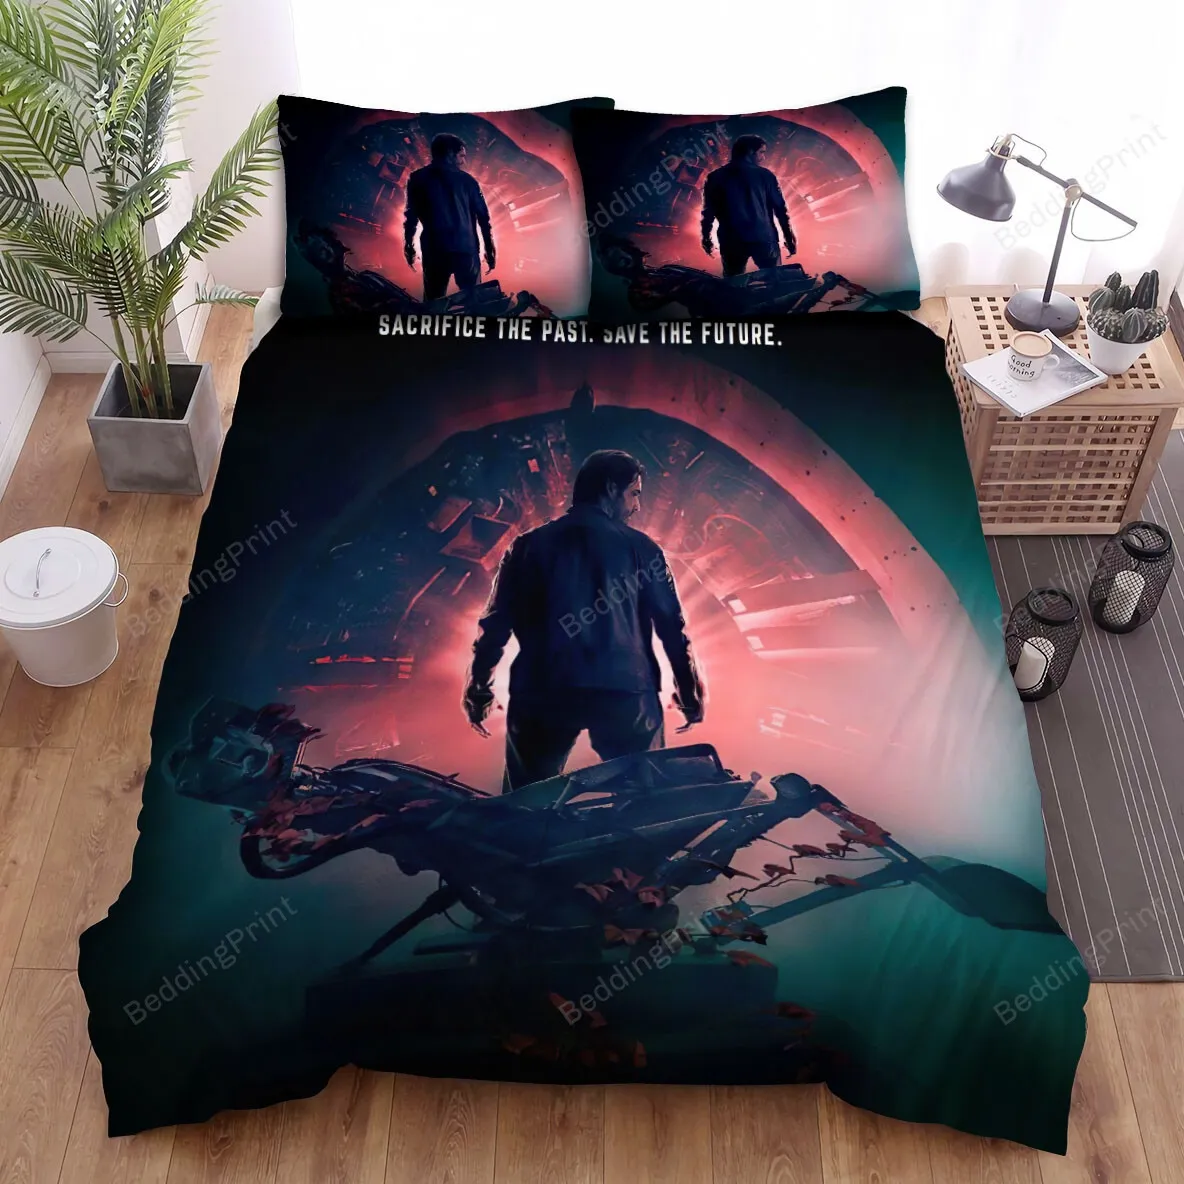 12 Monkeys (20152018) Save The Future Movie Poster Bed Sheets Spread Comforter Duvet Cover Bedding Sets